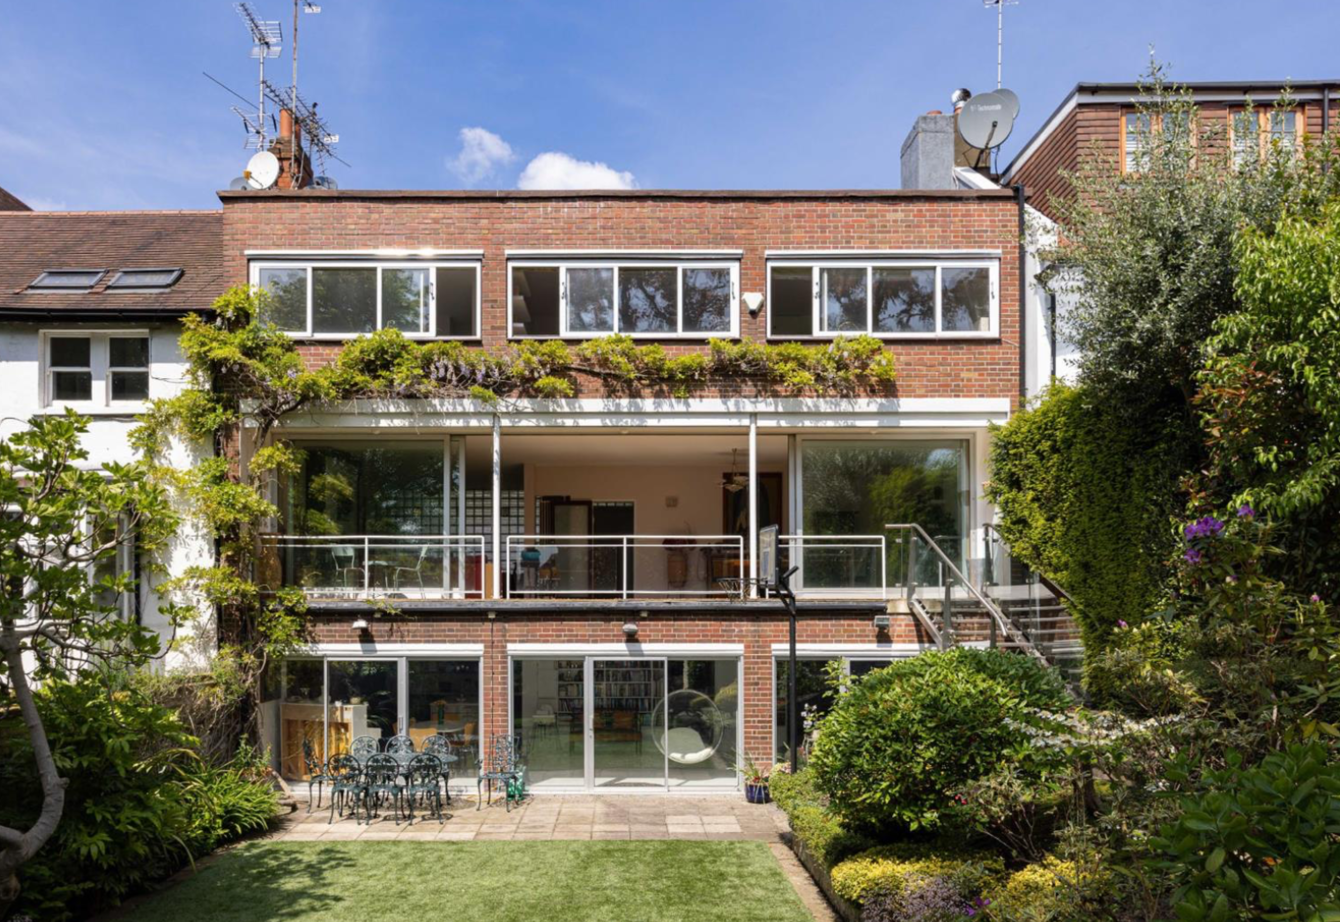 sold-akwright-road-london-423-view4